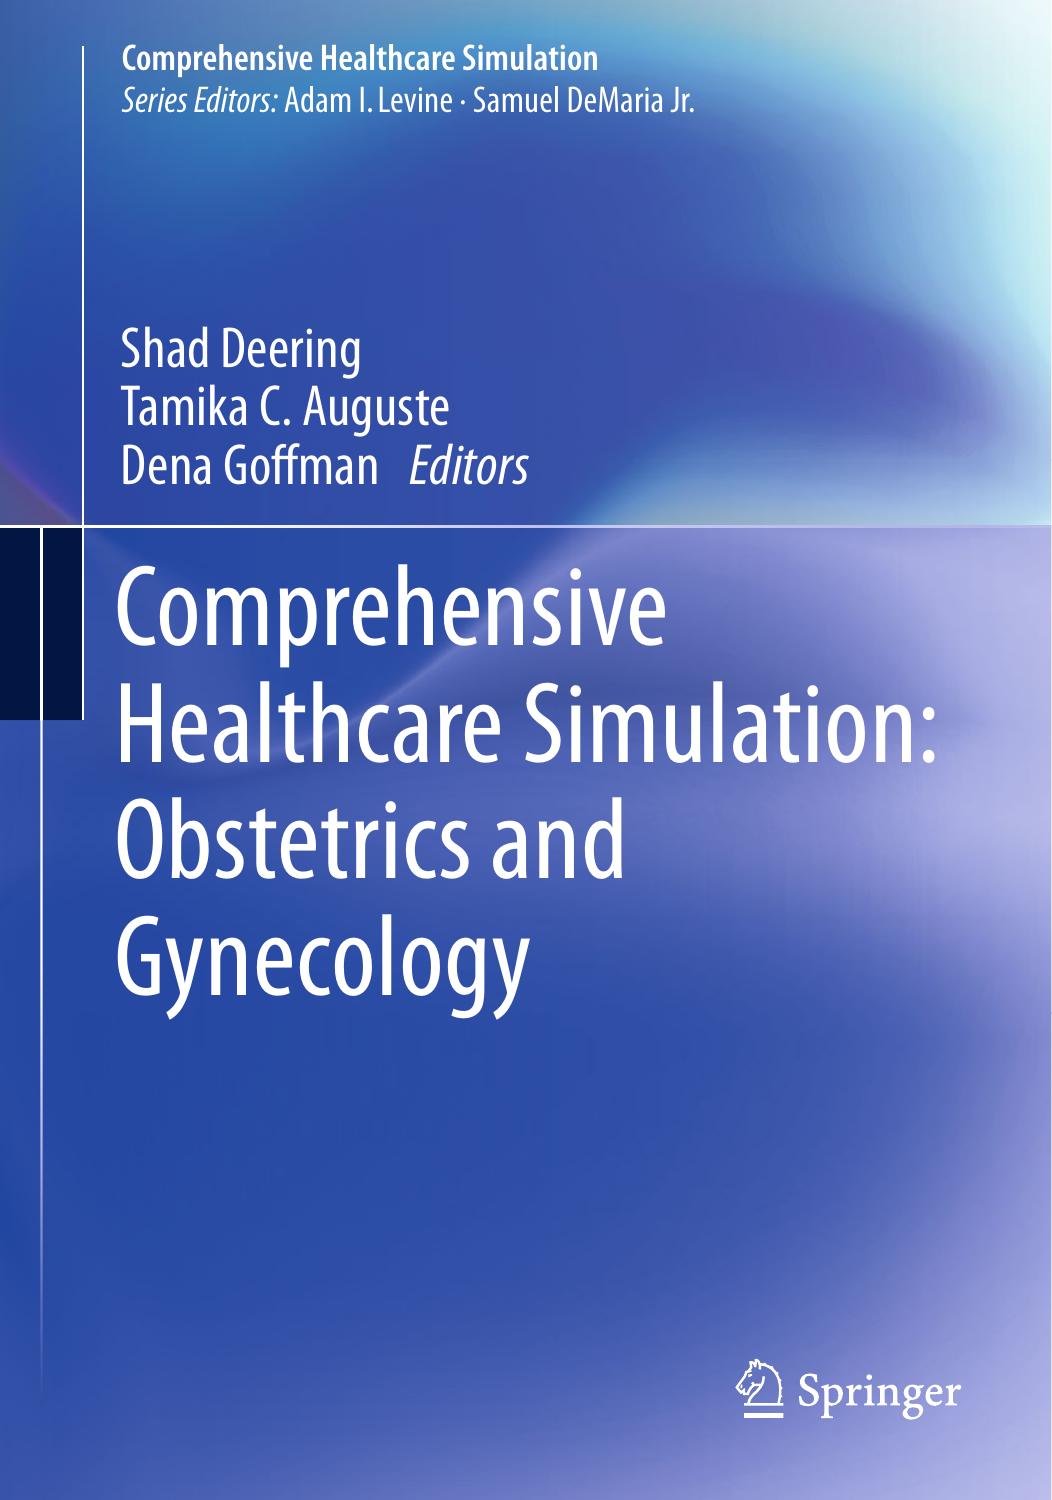 Comprehensive Healthcare Simulation  Obstetrics and Gynecology 2019